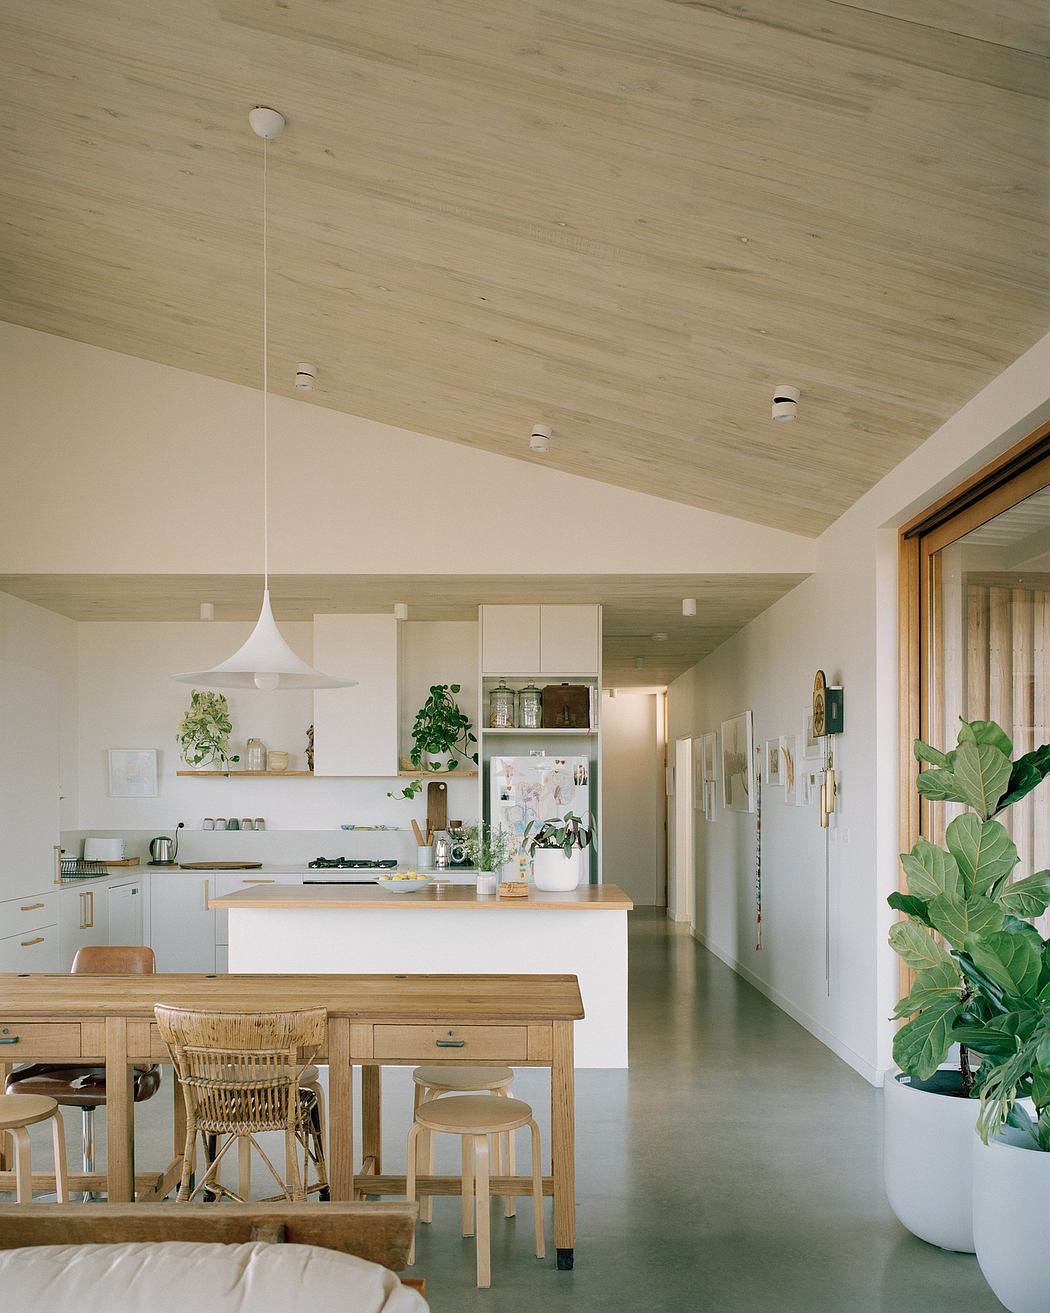 A warm, light-filled kitchen with a wooden ceiling and minimalist decor. Natural materials and greenery create a cozy atmosphere.